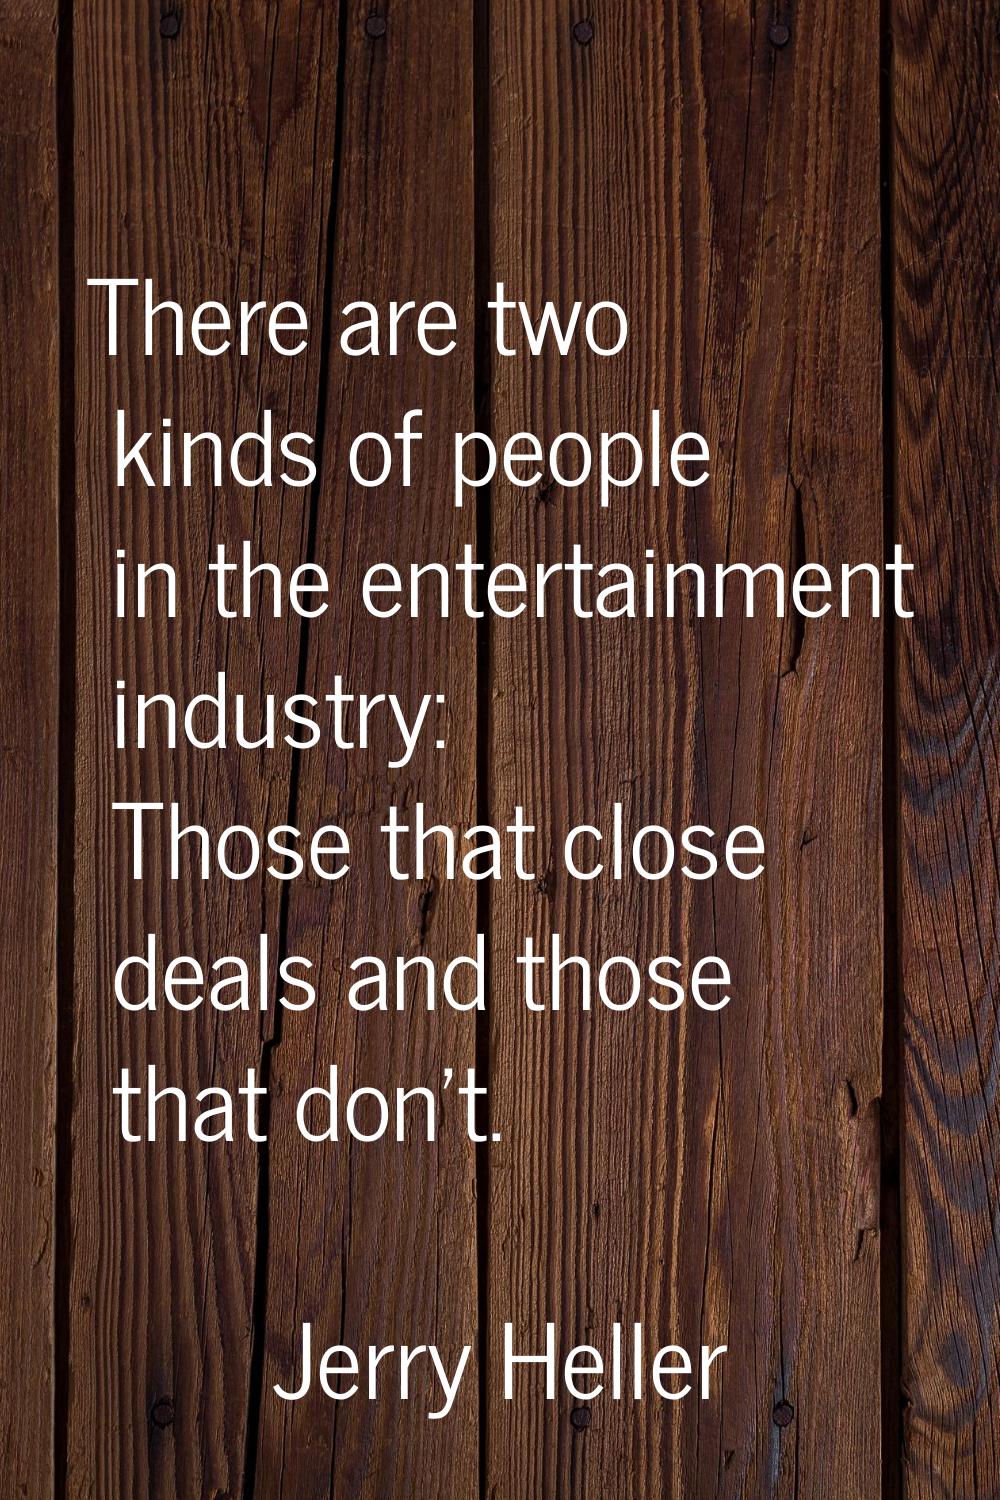 There are two kinds of people in the entertainment industry: Those that close deals and those that 